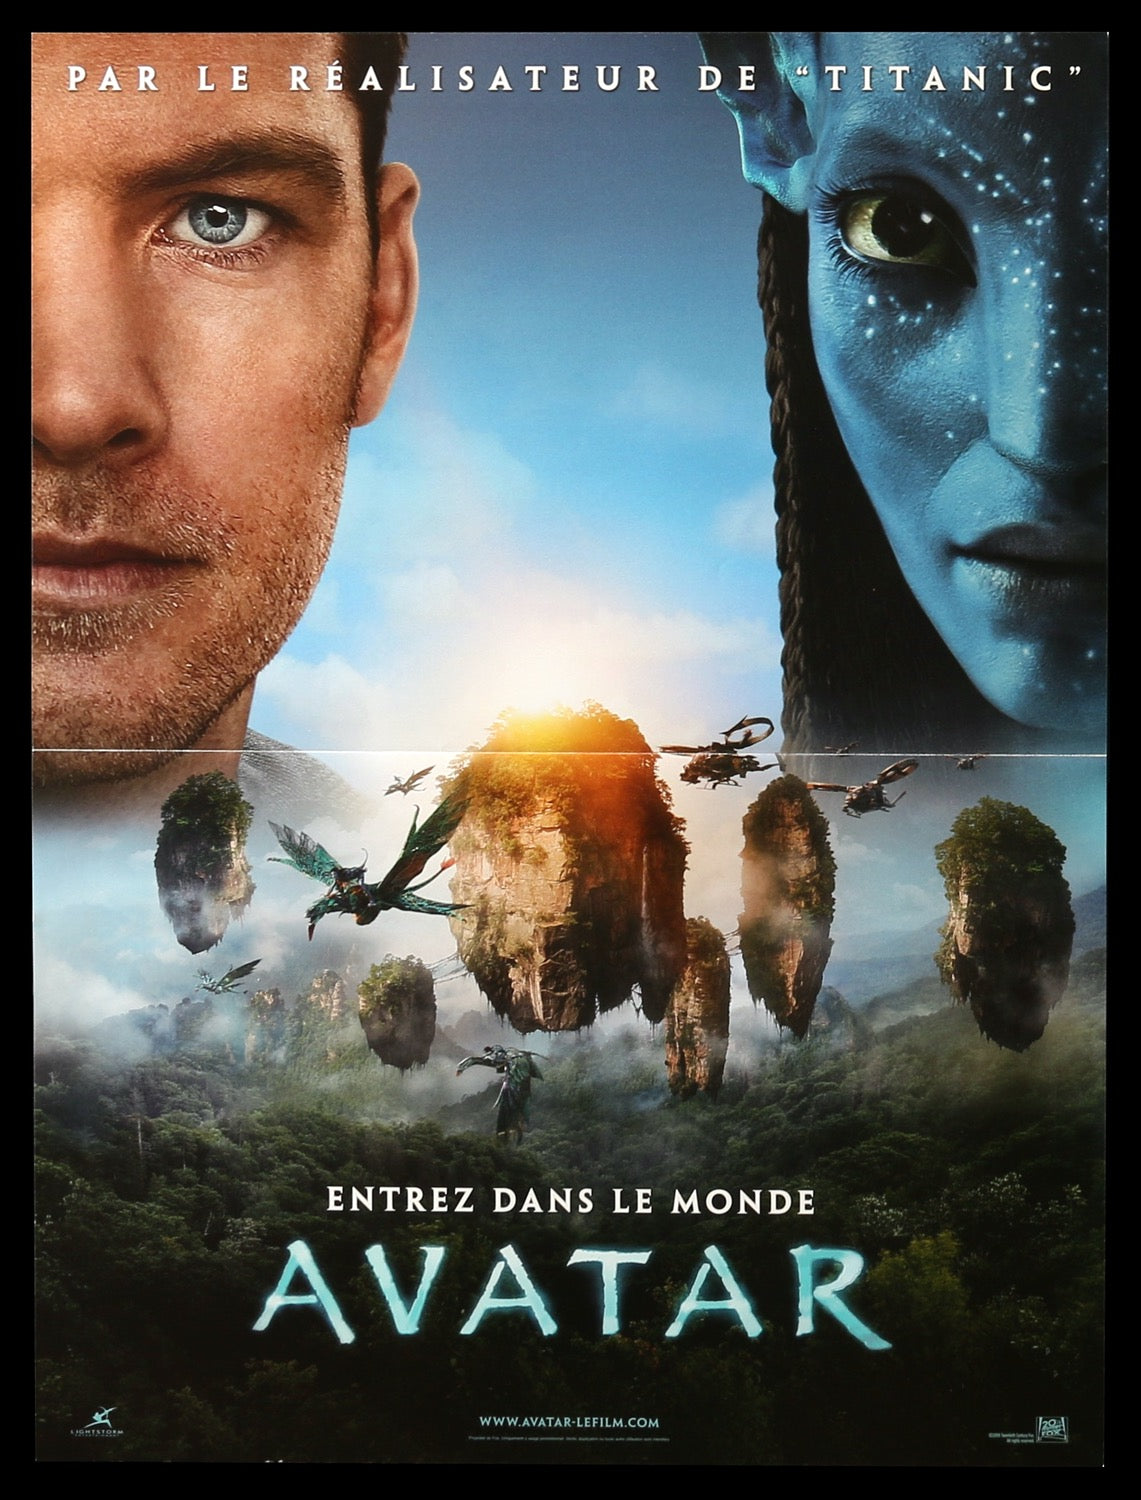 Amazoncom Avatar The Way of Water Poster 2022 Avatar 2009 and the  ReRelease Poster of Avatar Set of 3 Movie Posters 11 x 17 Posters   Prints